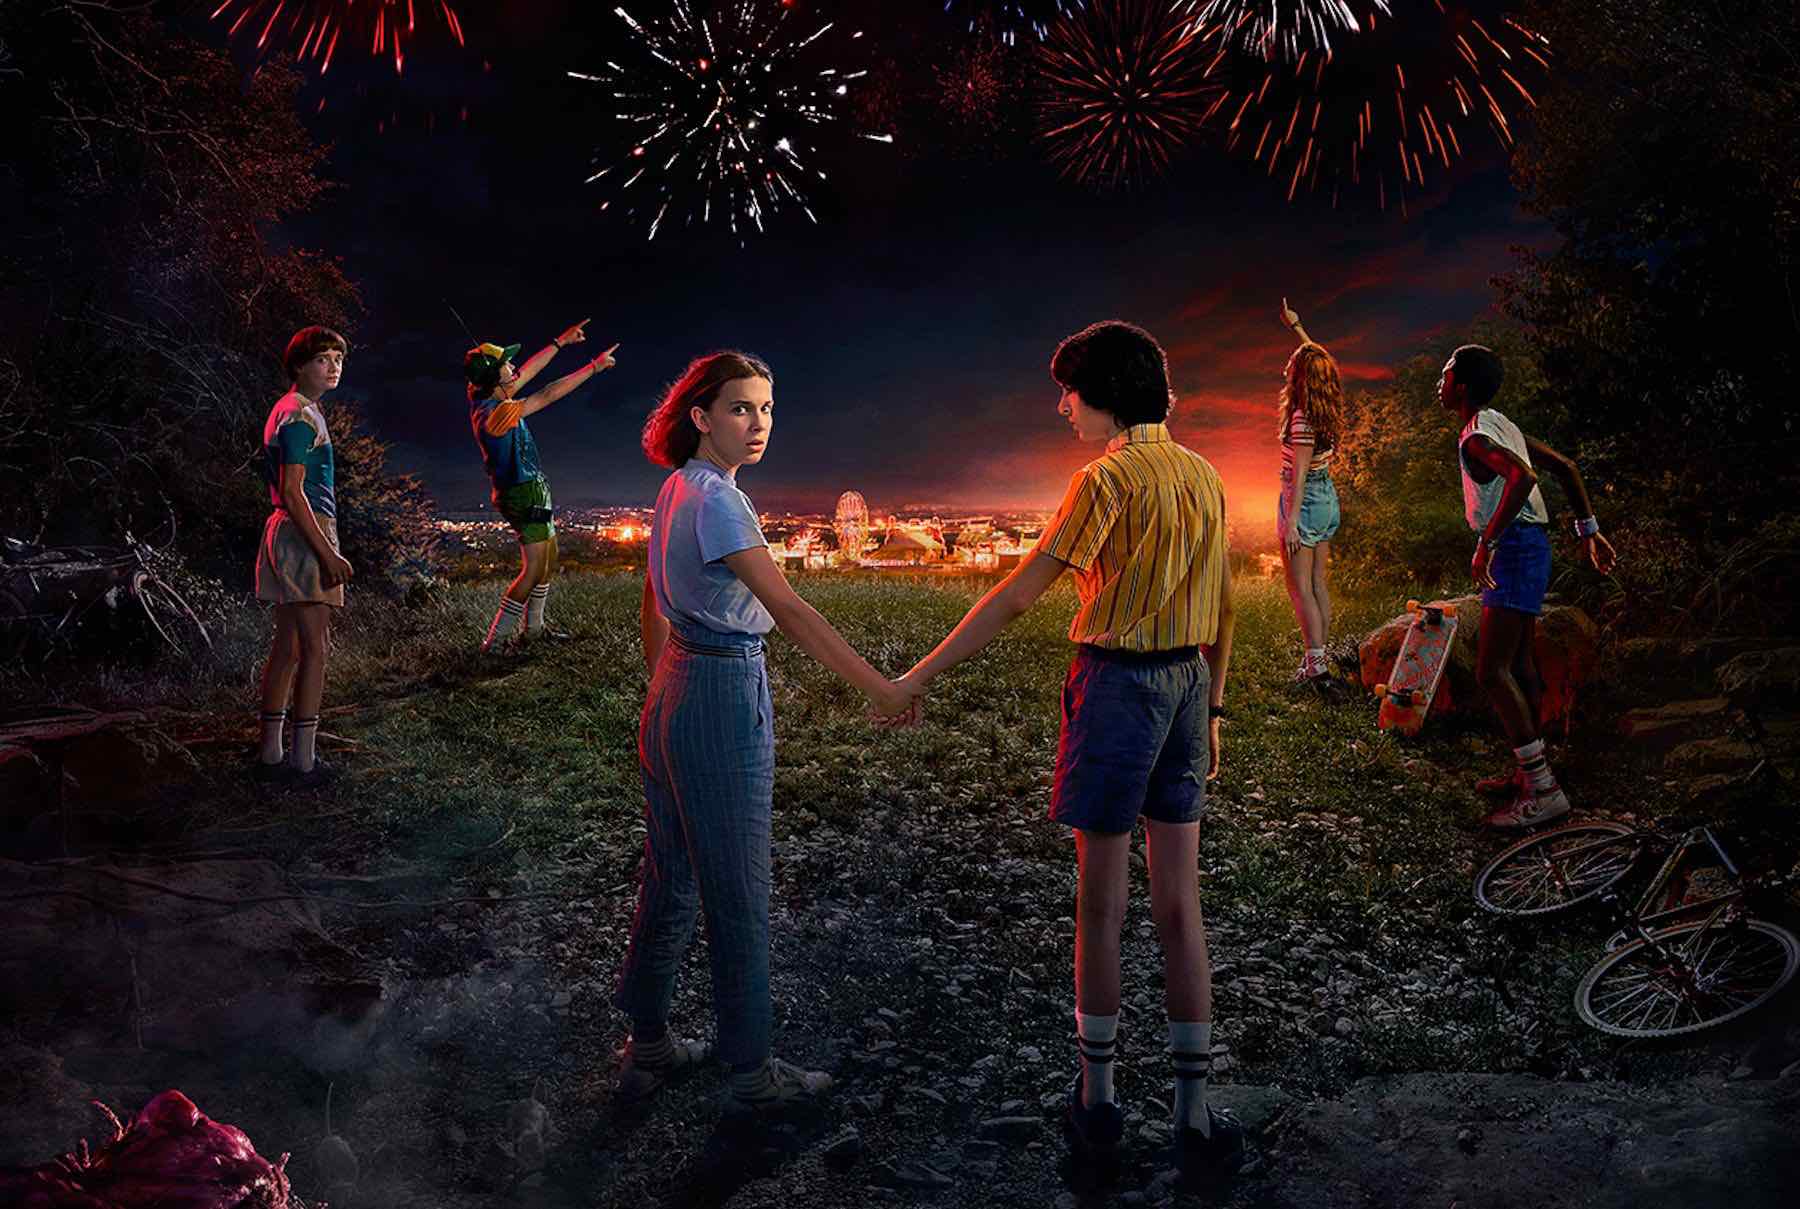 Netflix's 'Stranger Things' is gripping 80s nostalgia shot with a pitch-perfect cast. Here’s why the show deserves your vote in the Bingewatch Awards.